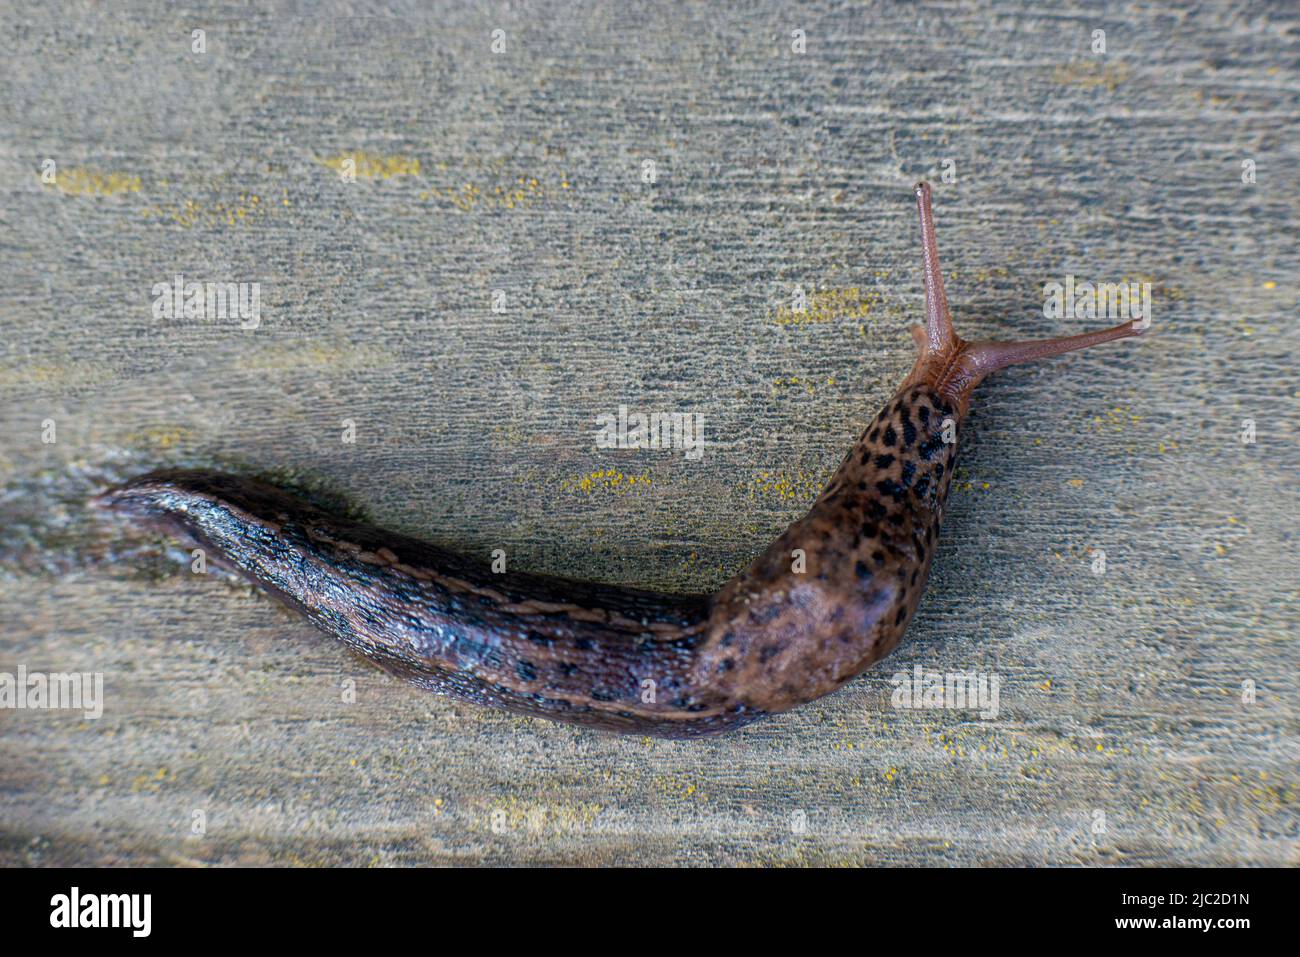 Snail without shell. Leopard slug Limax maximus, family Limacidae, crawls on a wooden surface. High quality photo Stock Photo